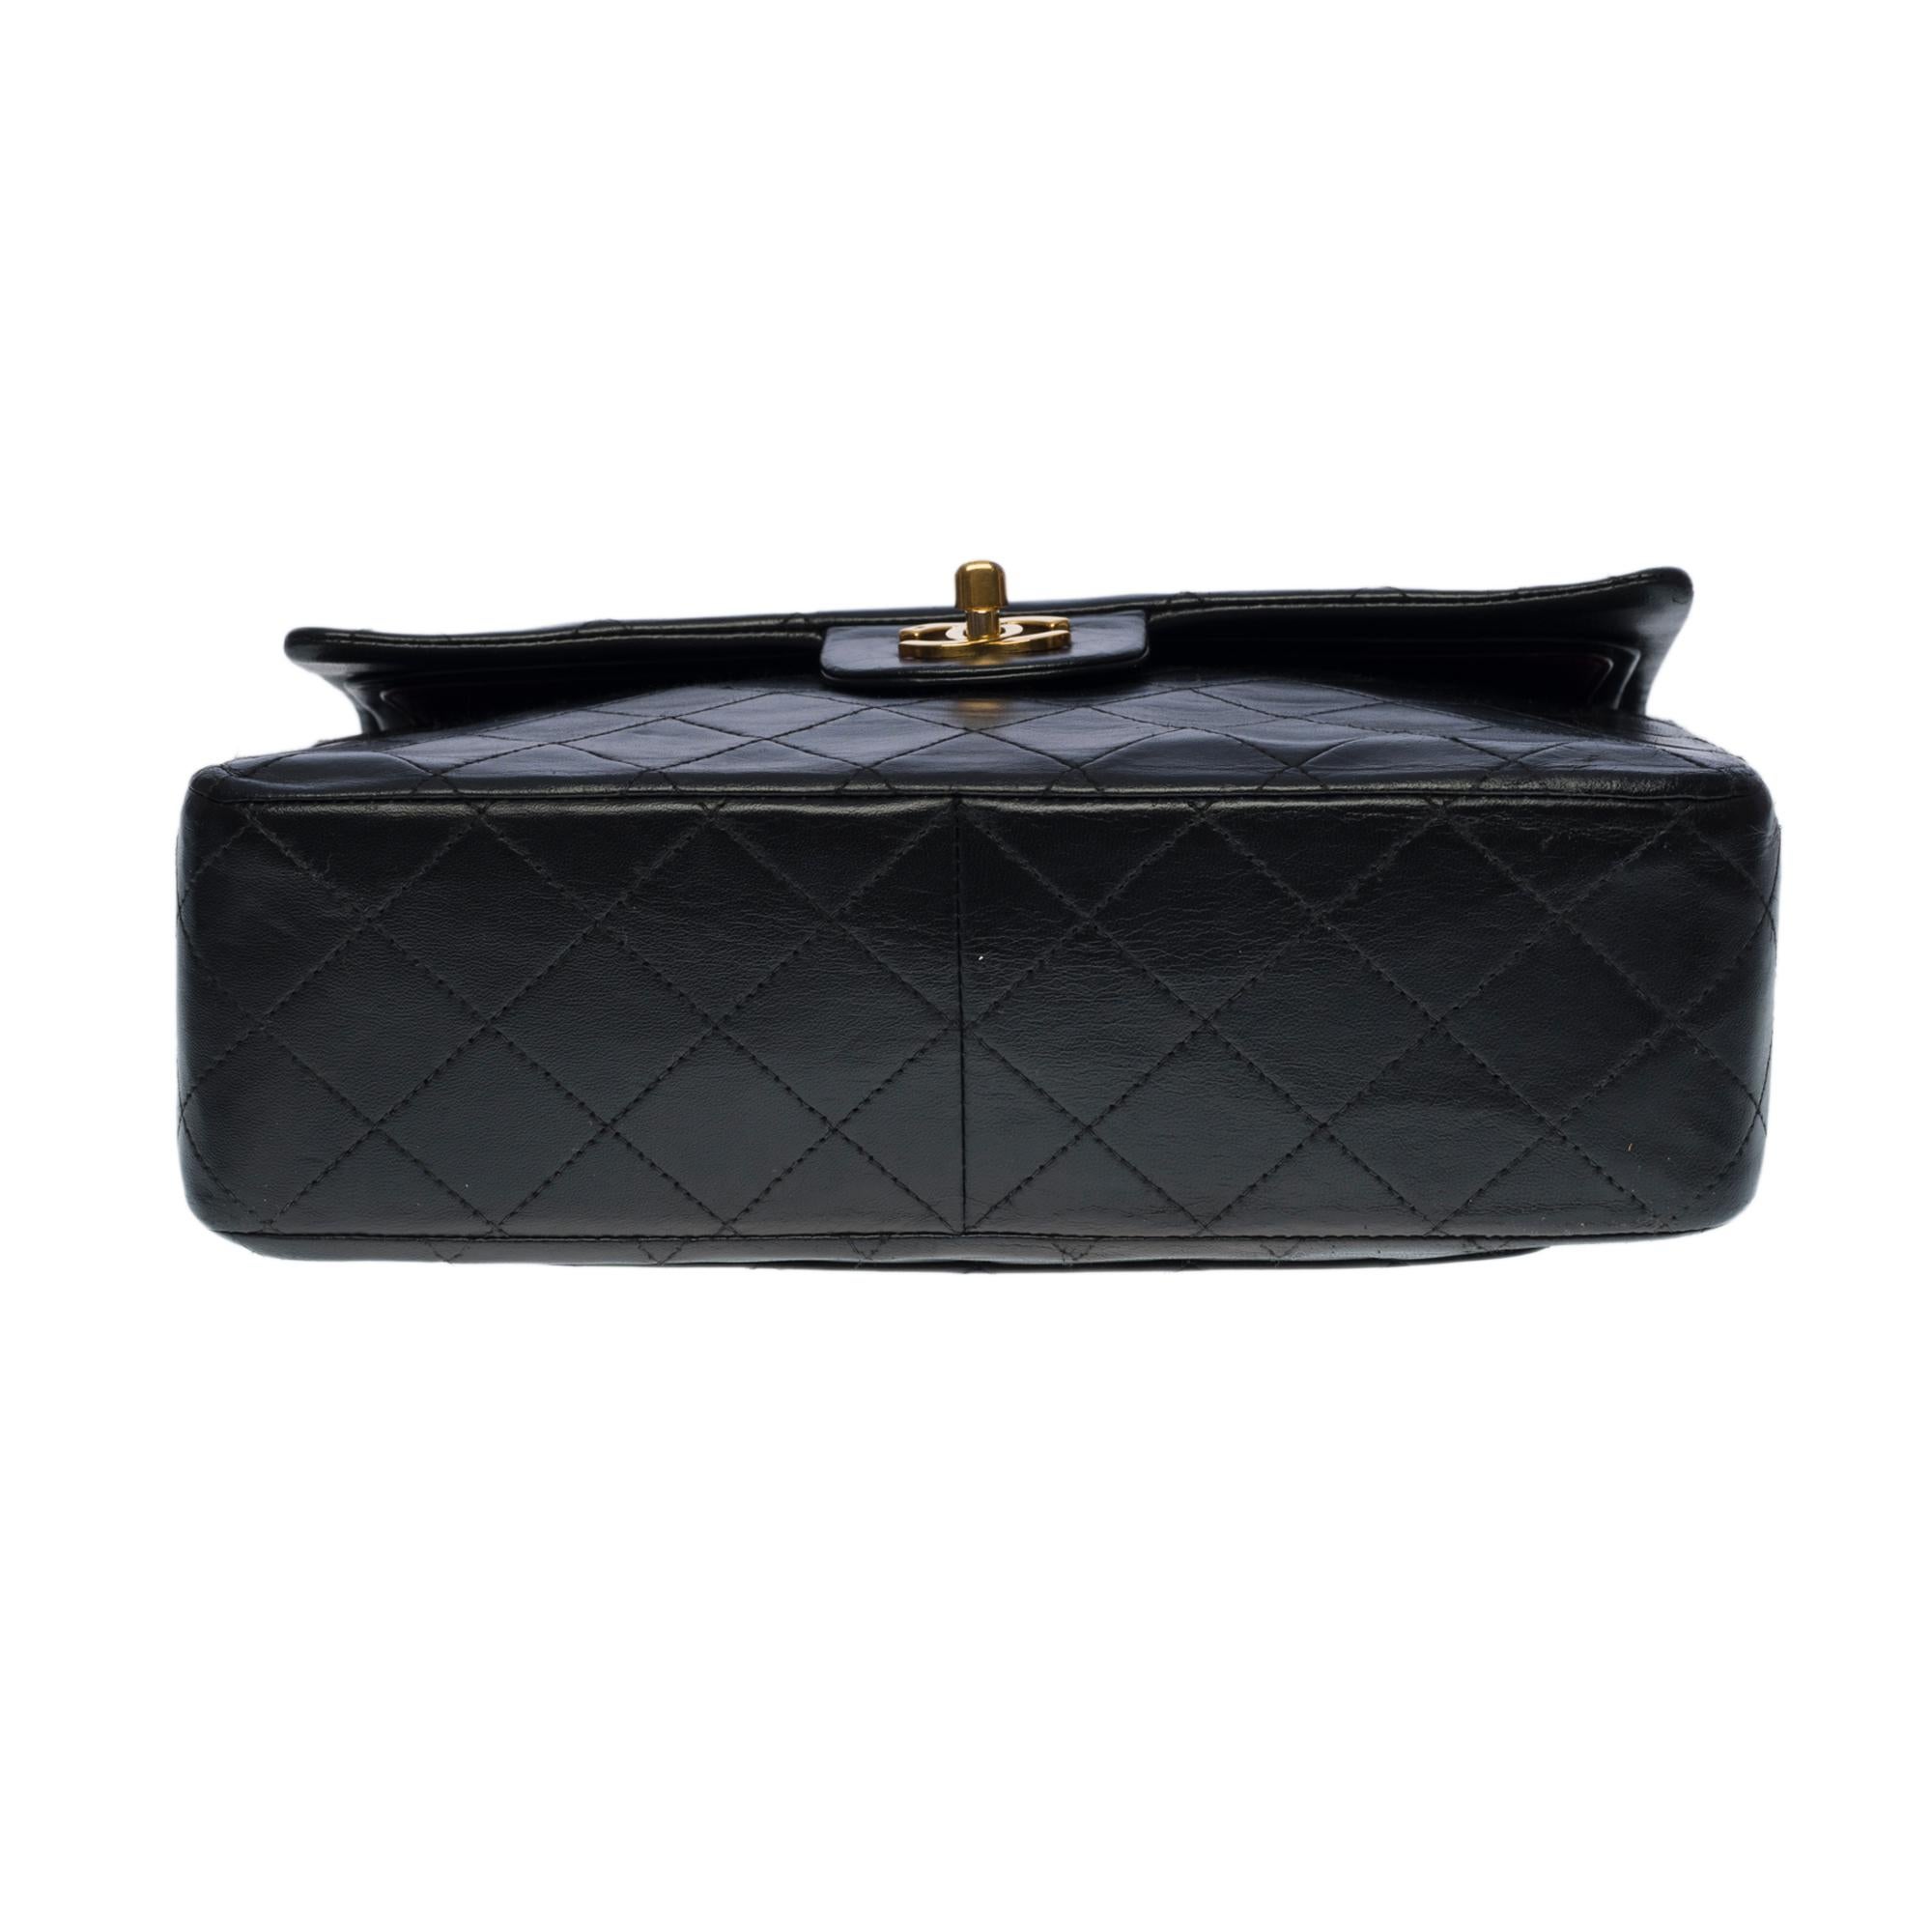 Chanel Timeless medium 25 cm bag with double flap in black quilted leather, GHW For Sale 2